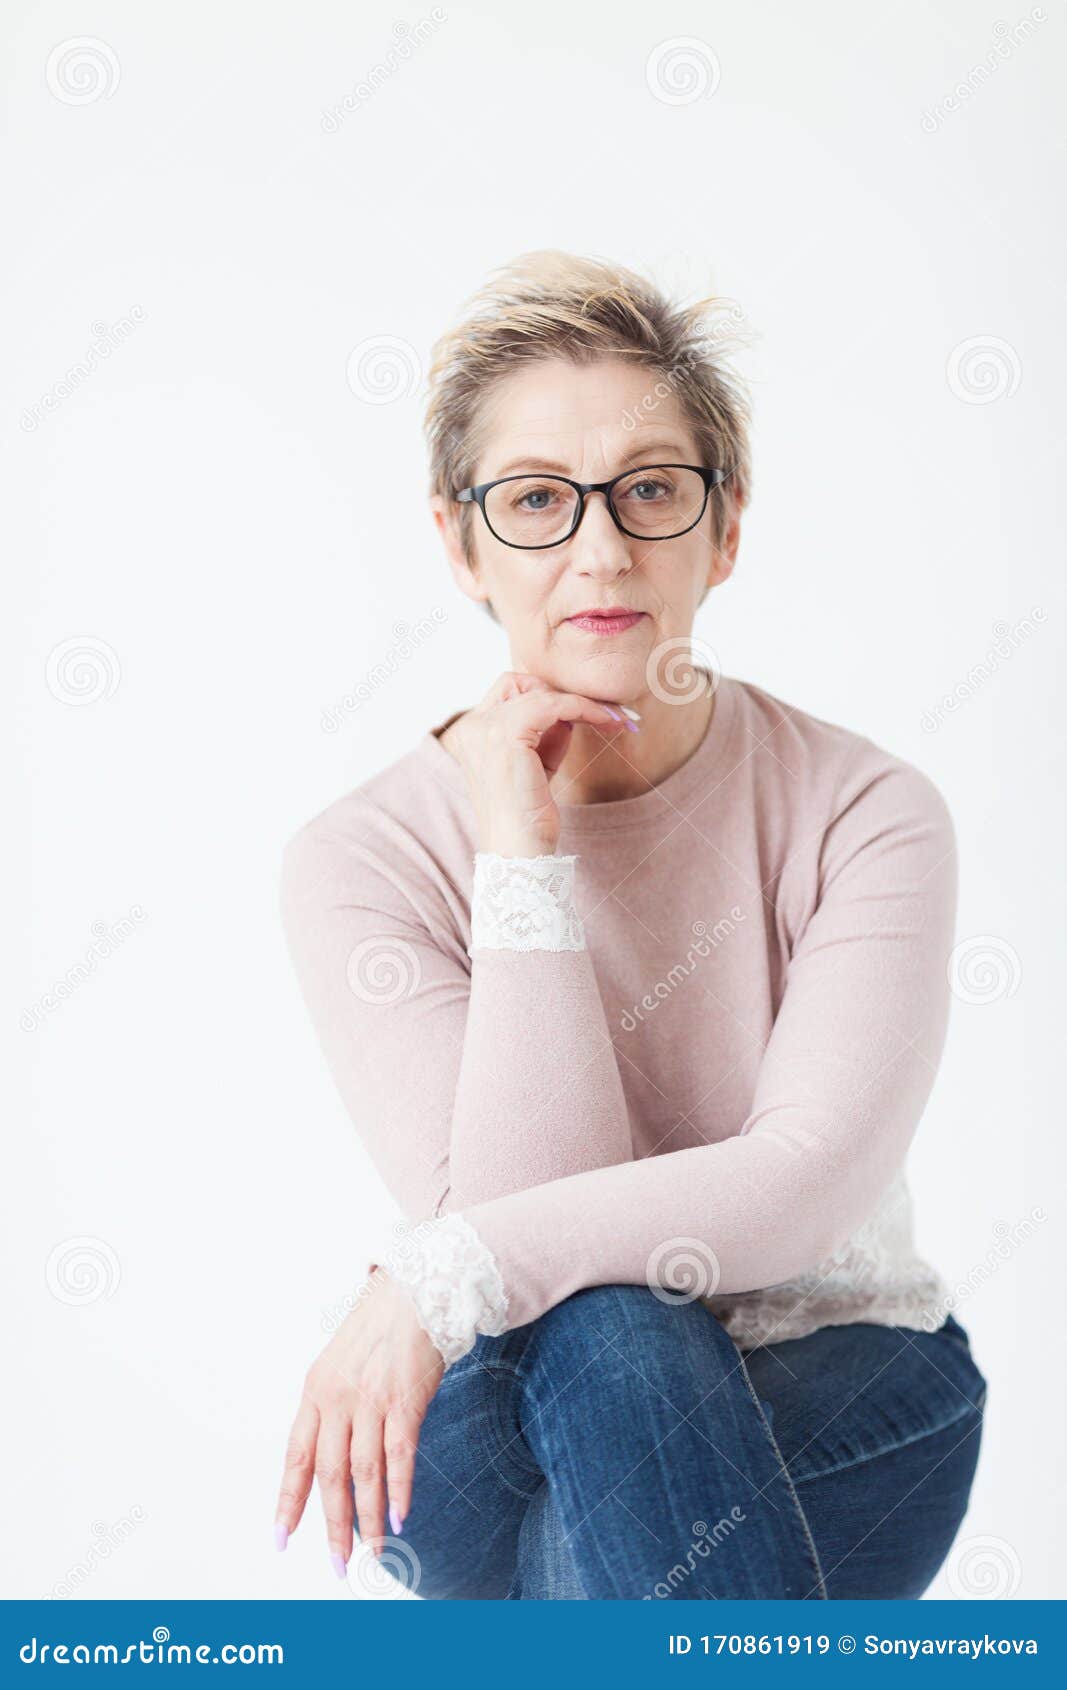 counter pear Bother Elegant Mature Woman with Glasses Stock Image - Image of frames, talk:  170861919